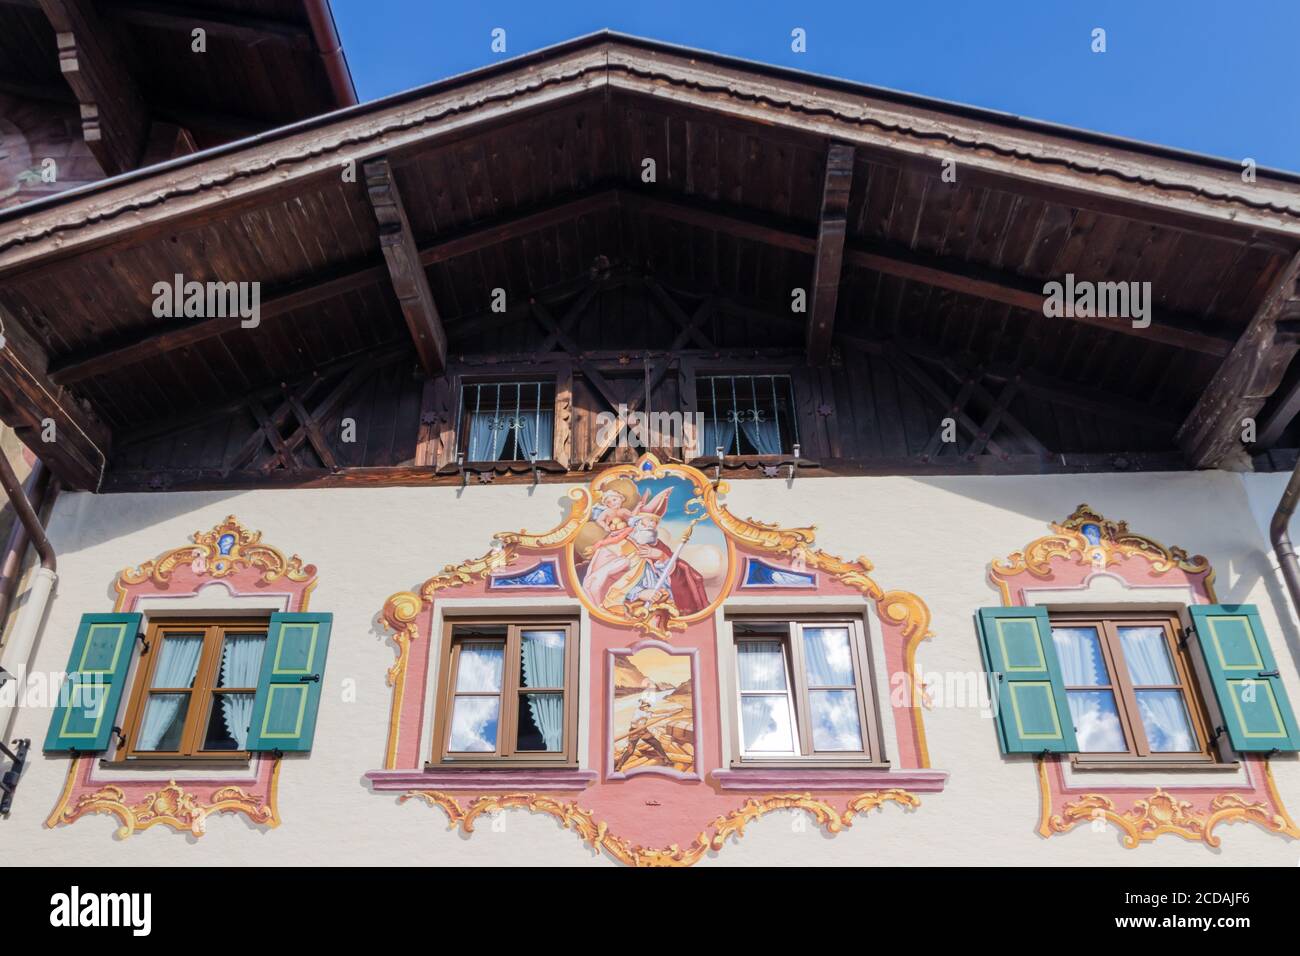 The beautiful city of Mittenwald from Germany and its painted facades Stock Photo